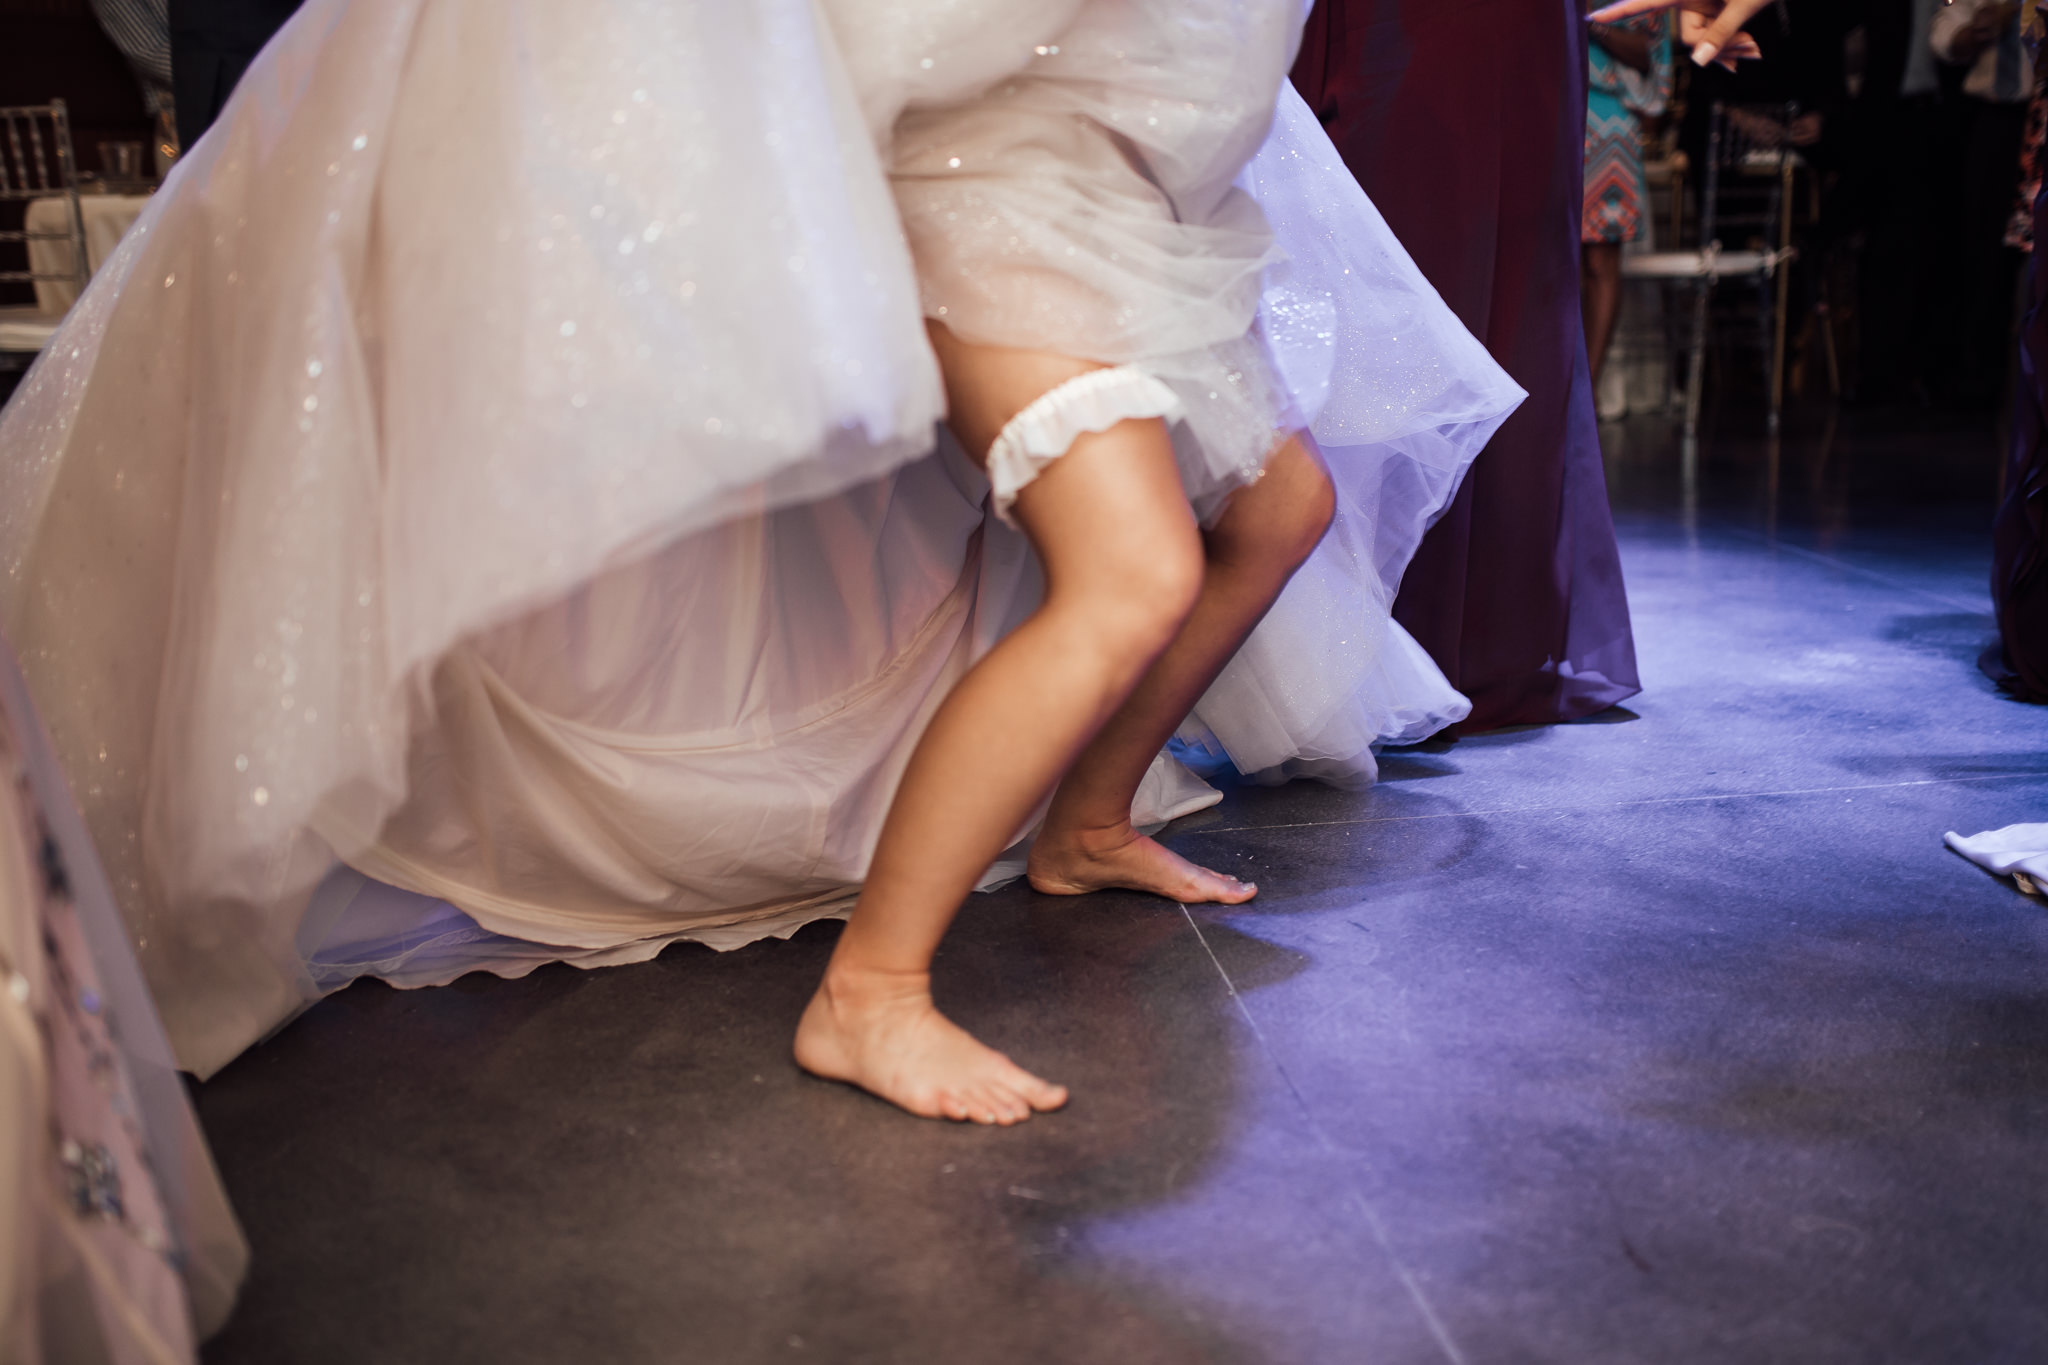 memphis-wedding-photographer-the-warmth-around-you-best-dance-moves-2.jpg